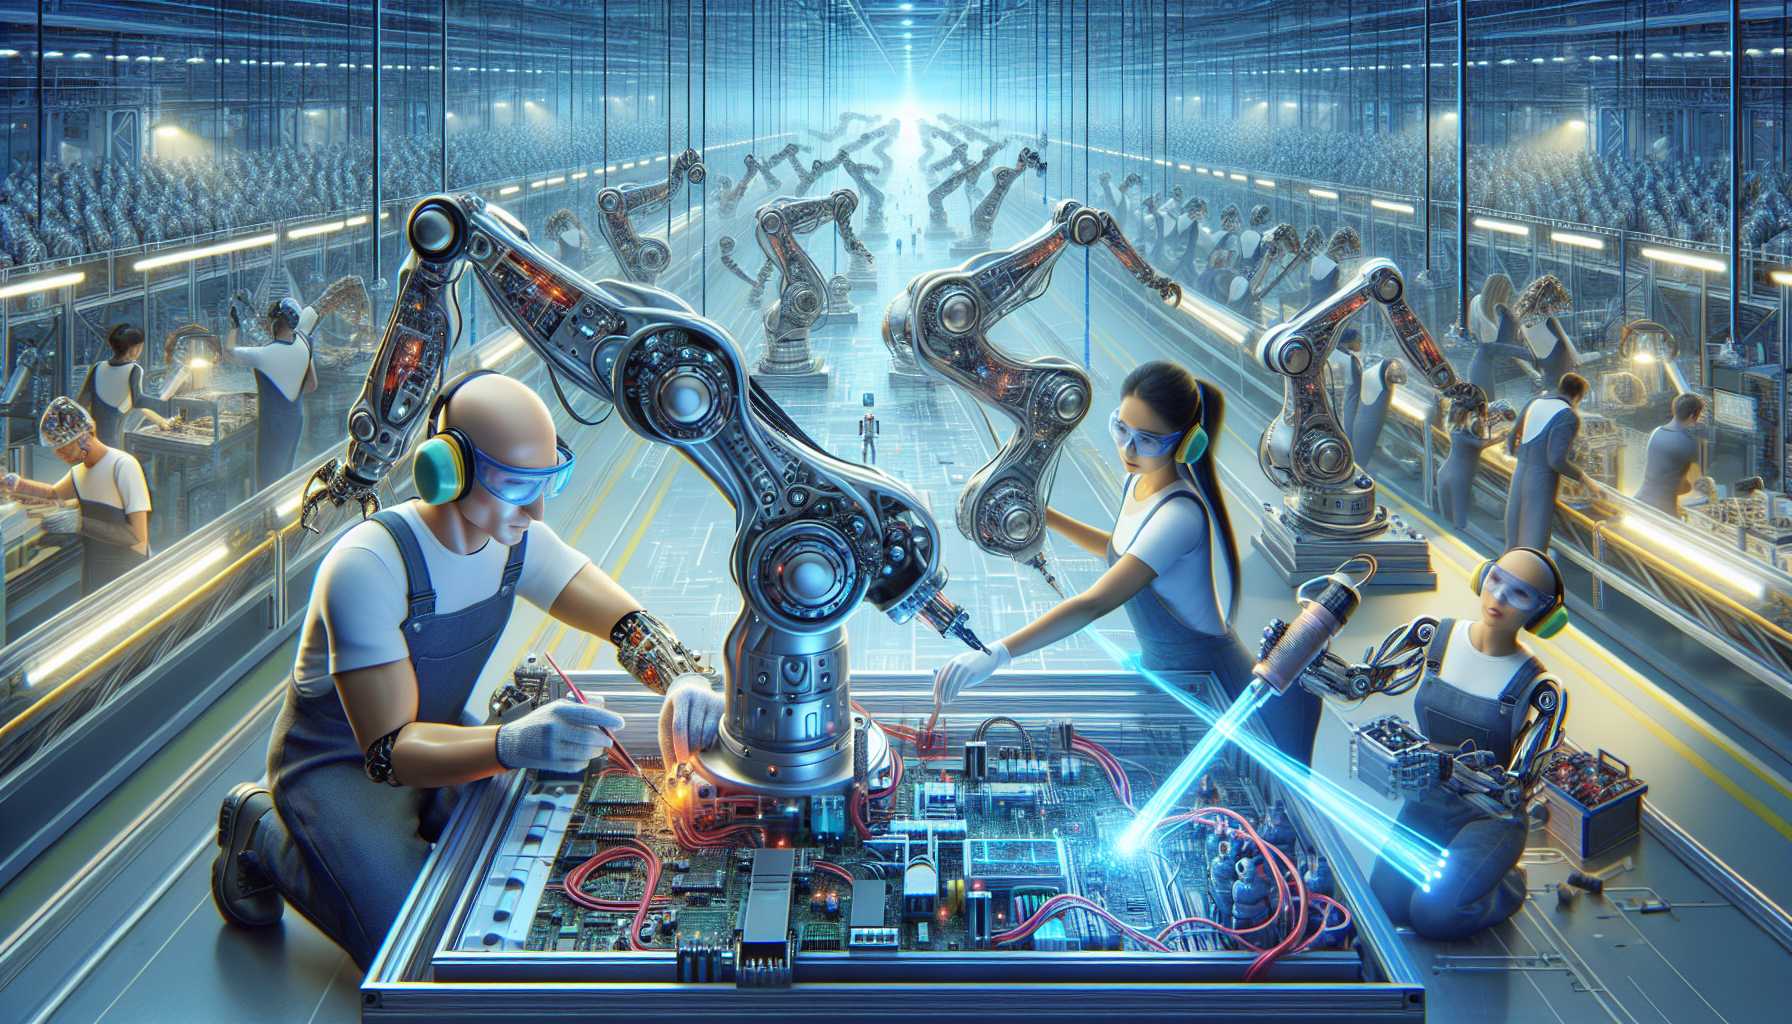 Robots and humans working together on an assembly line